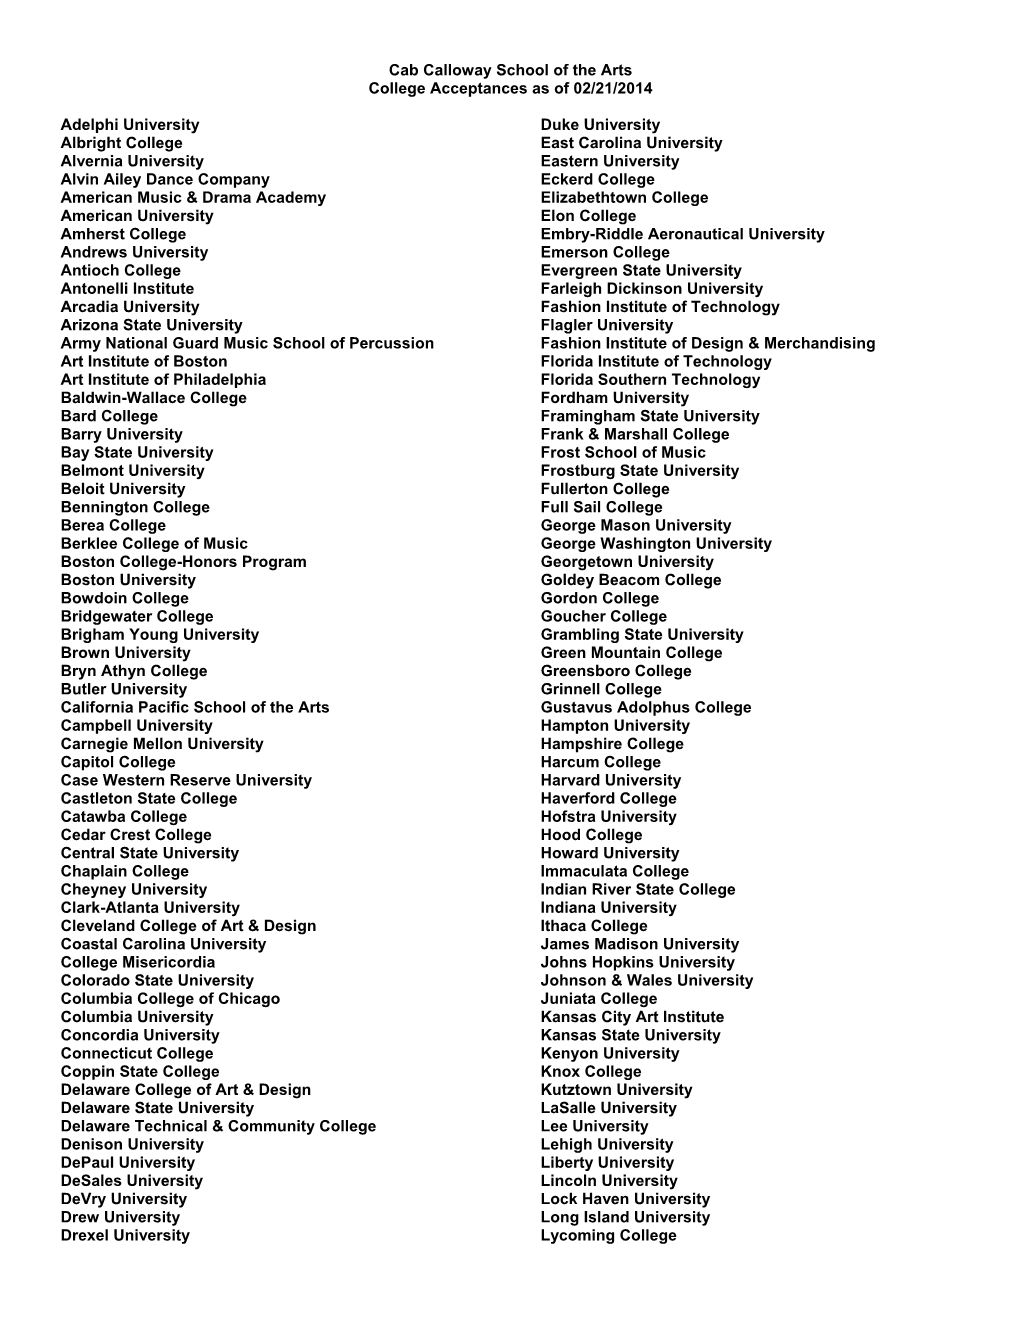 Cab Calloway School of the Arts College Acceptances As of 02/21/2014